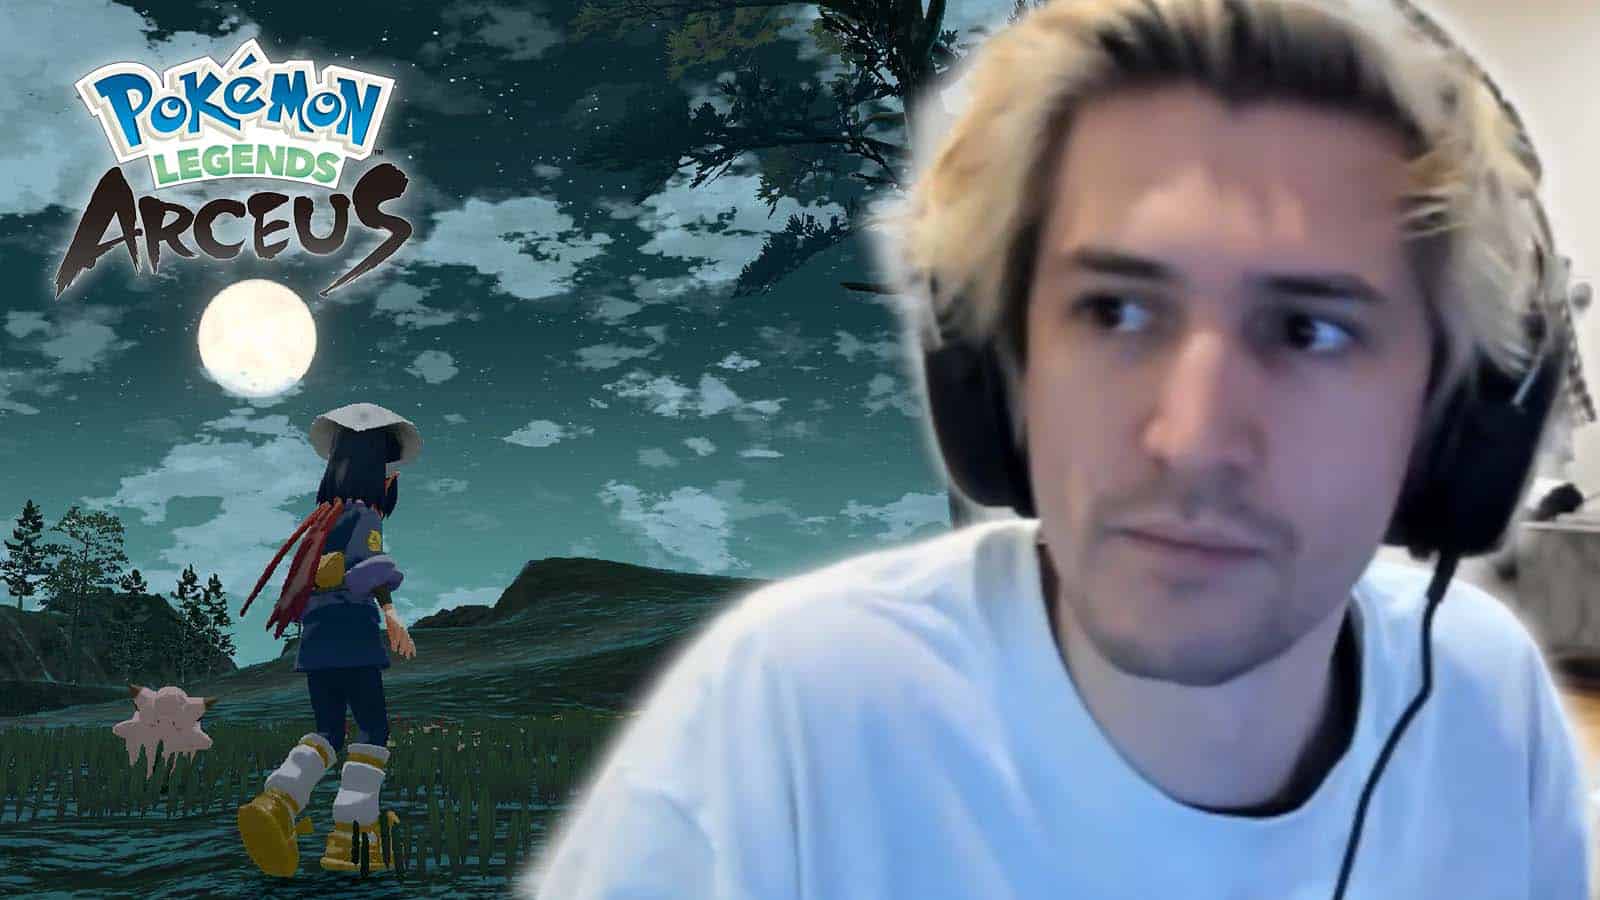 What xQc had to say about Pokemon Legends Arceus gameplay trailer